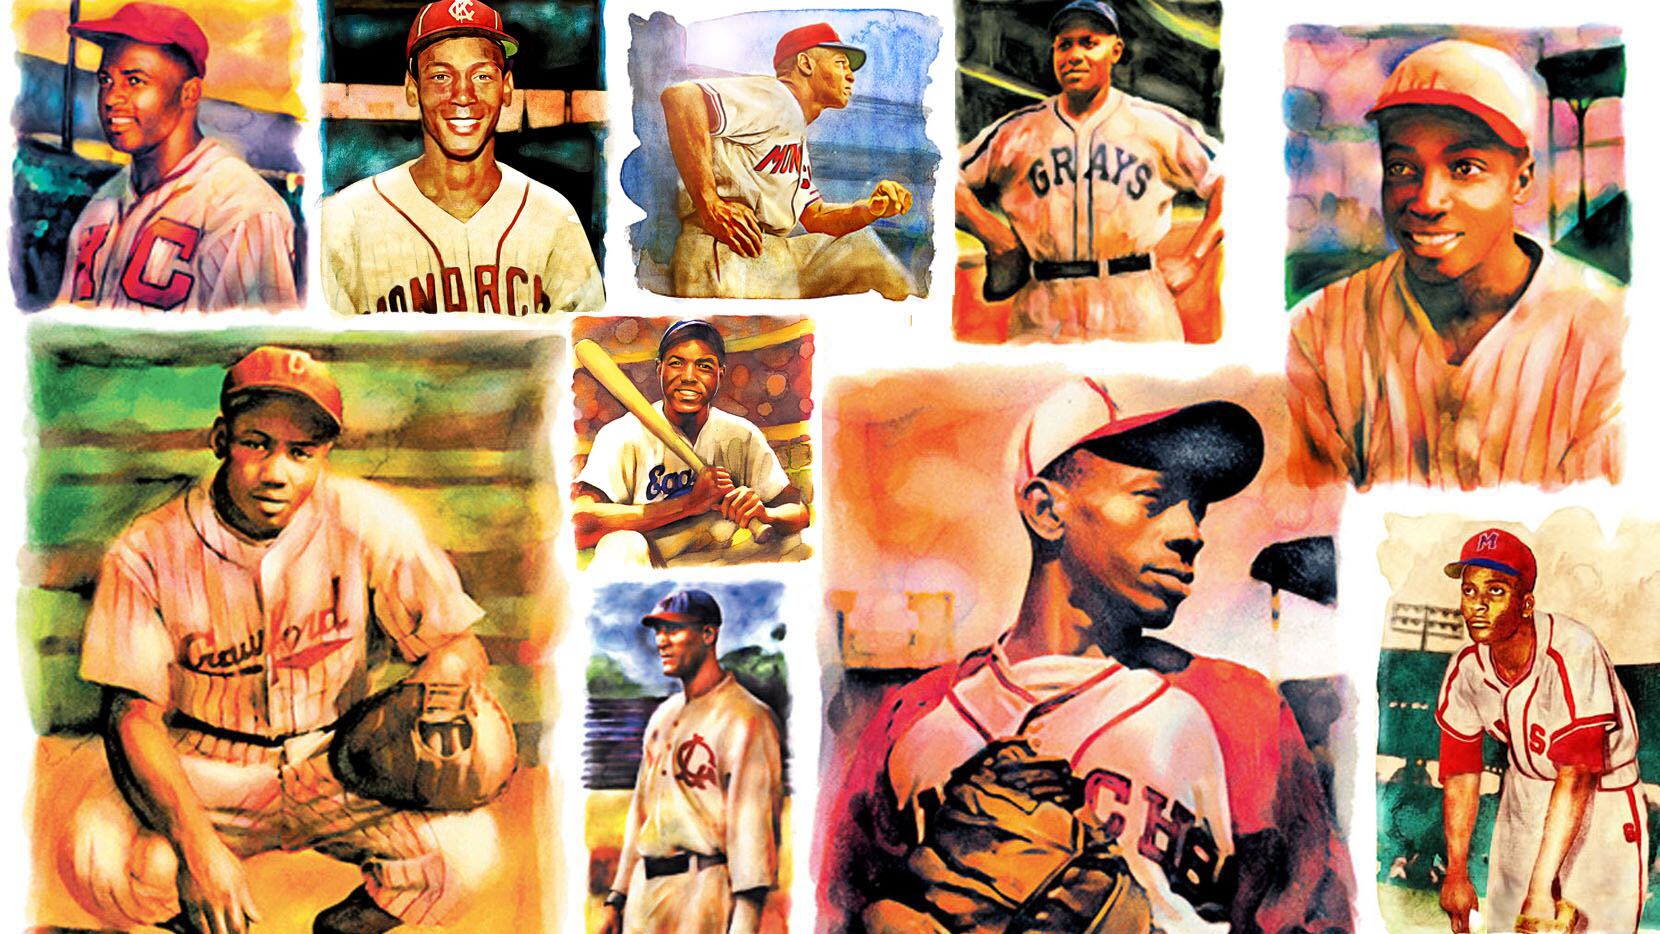 MLB The Show breaks barrier with Negro League players